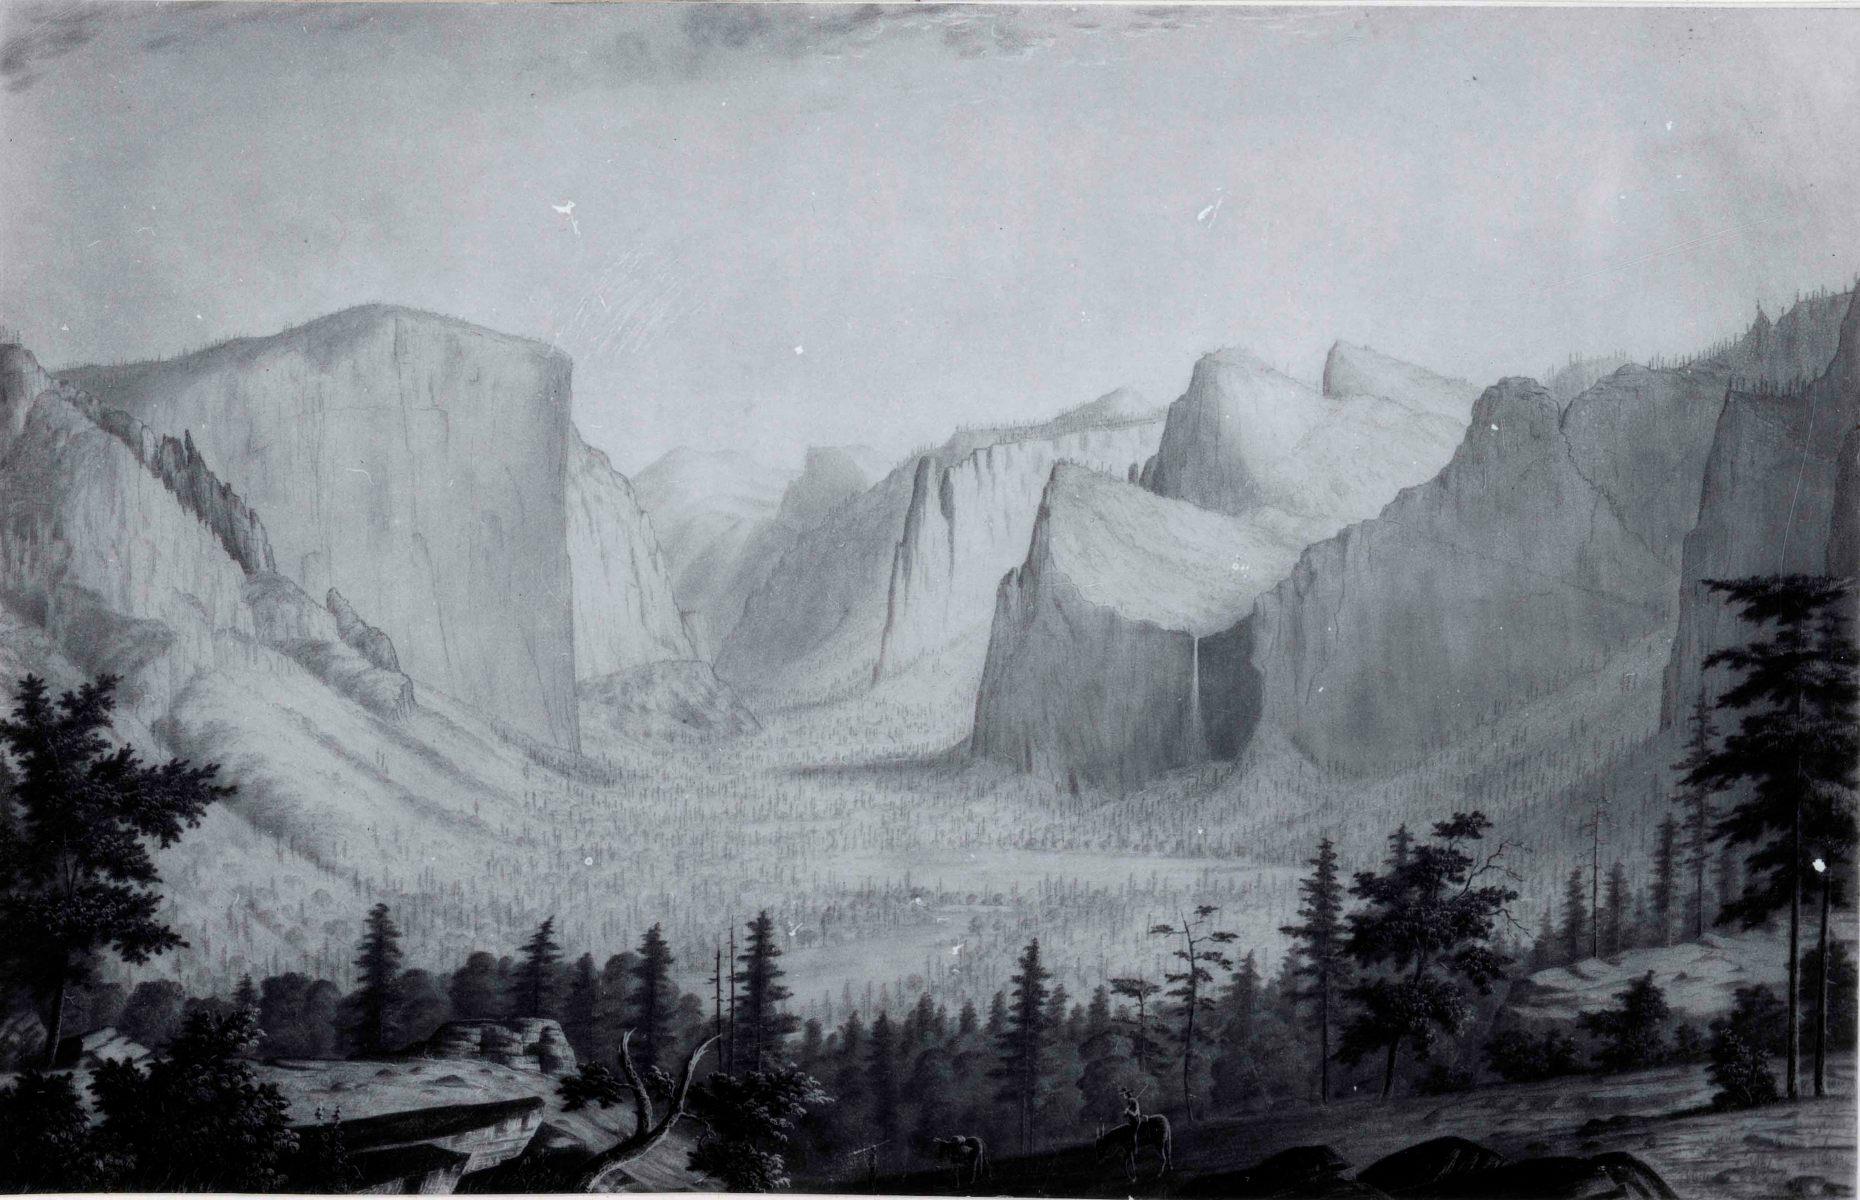 <p>The natural sanctuary offered by the valley's seclusion afforded its Indigenous residents some protection against Mexican, Spanish and other European-American colonists, but the California Gold Rush of 1848 marked a troubling turning point in Yosemite’s history. Thousands of miners and settlers descended upon the foothills of the Sierra Nevada, and tensions came to a head in 1851 when the Mariposa Battalion (sanctioned by the new state of California) burned the villages of the Miwuk peoples and took their ancestral lands. This 1855 drawing of Yosemite Valley is by Thomas Ayres.</p>